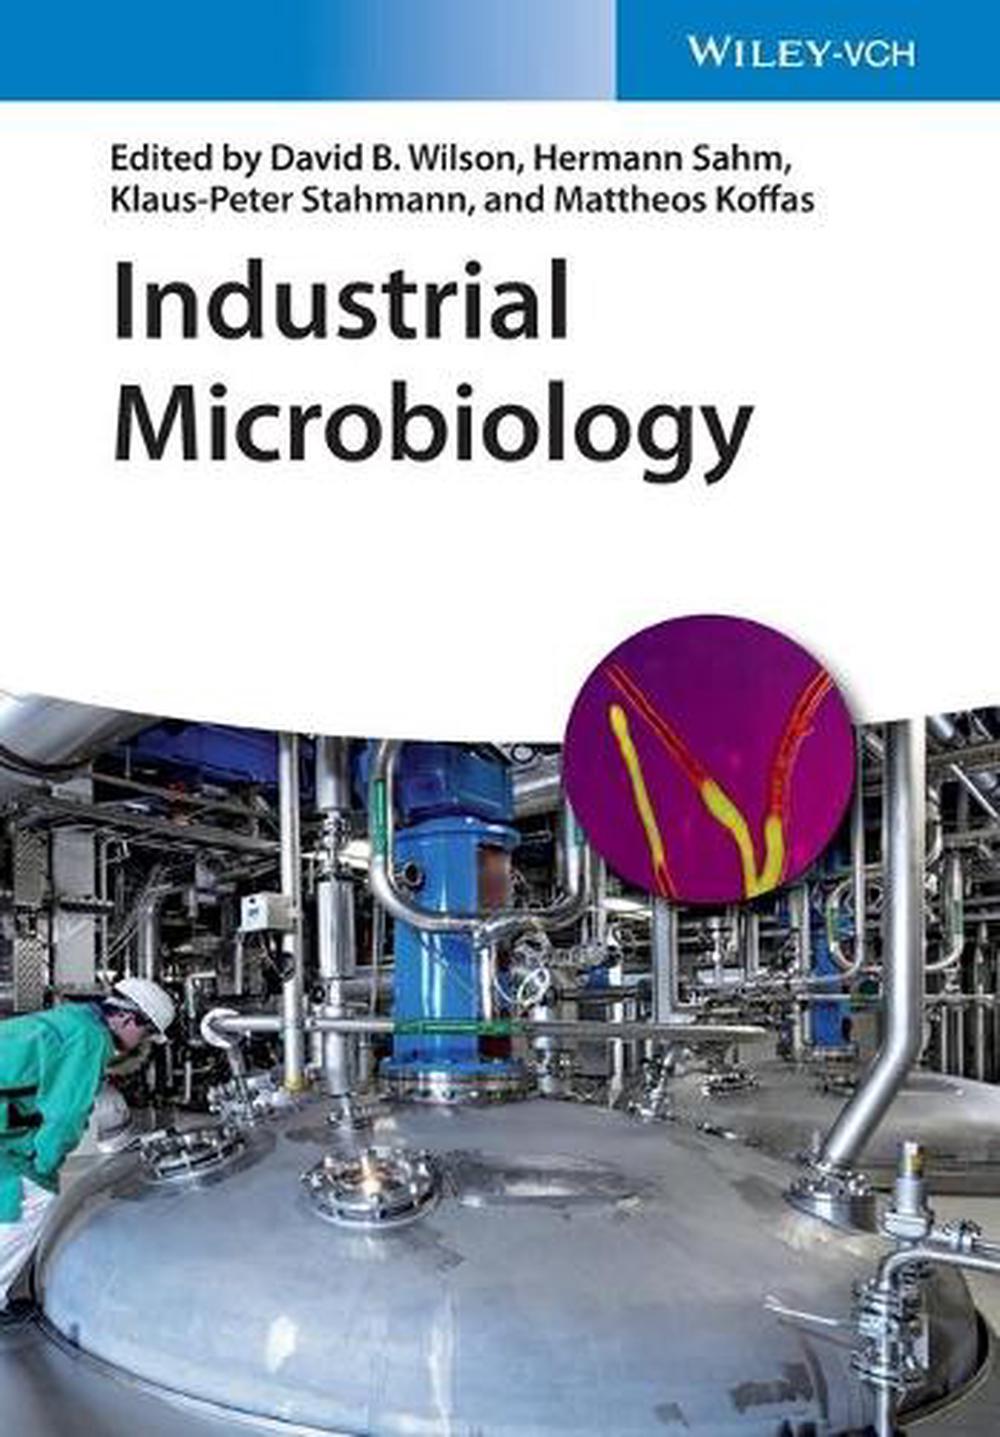 Industrial Microbiology by David B. Wilson Paperback Book Free Shipping